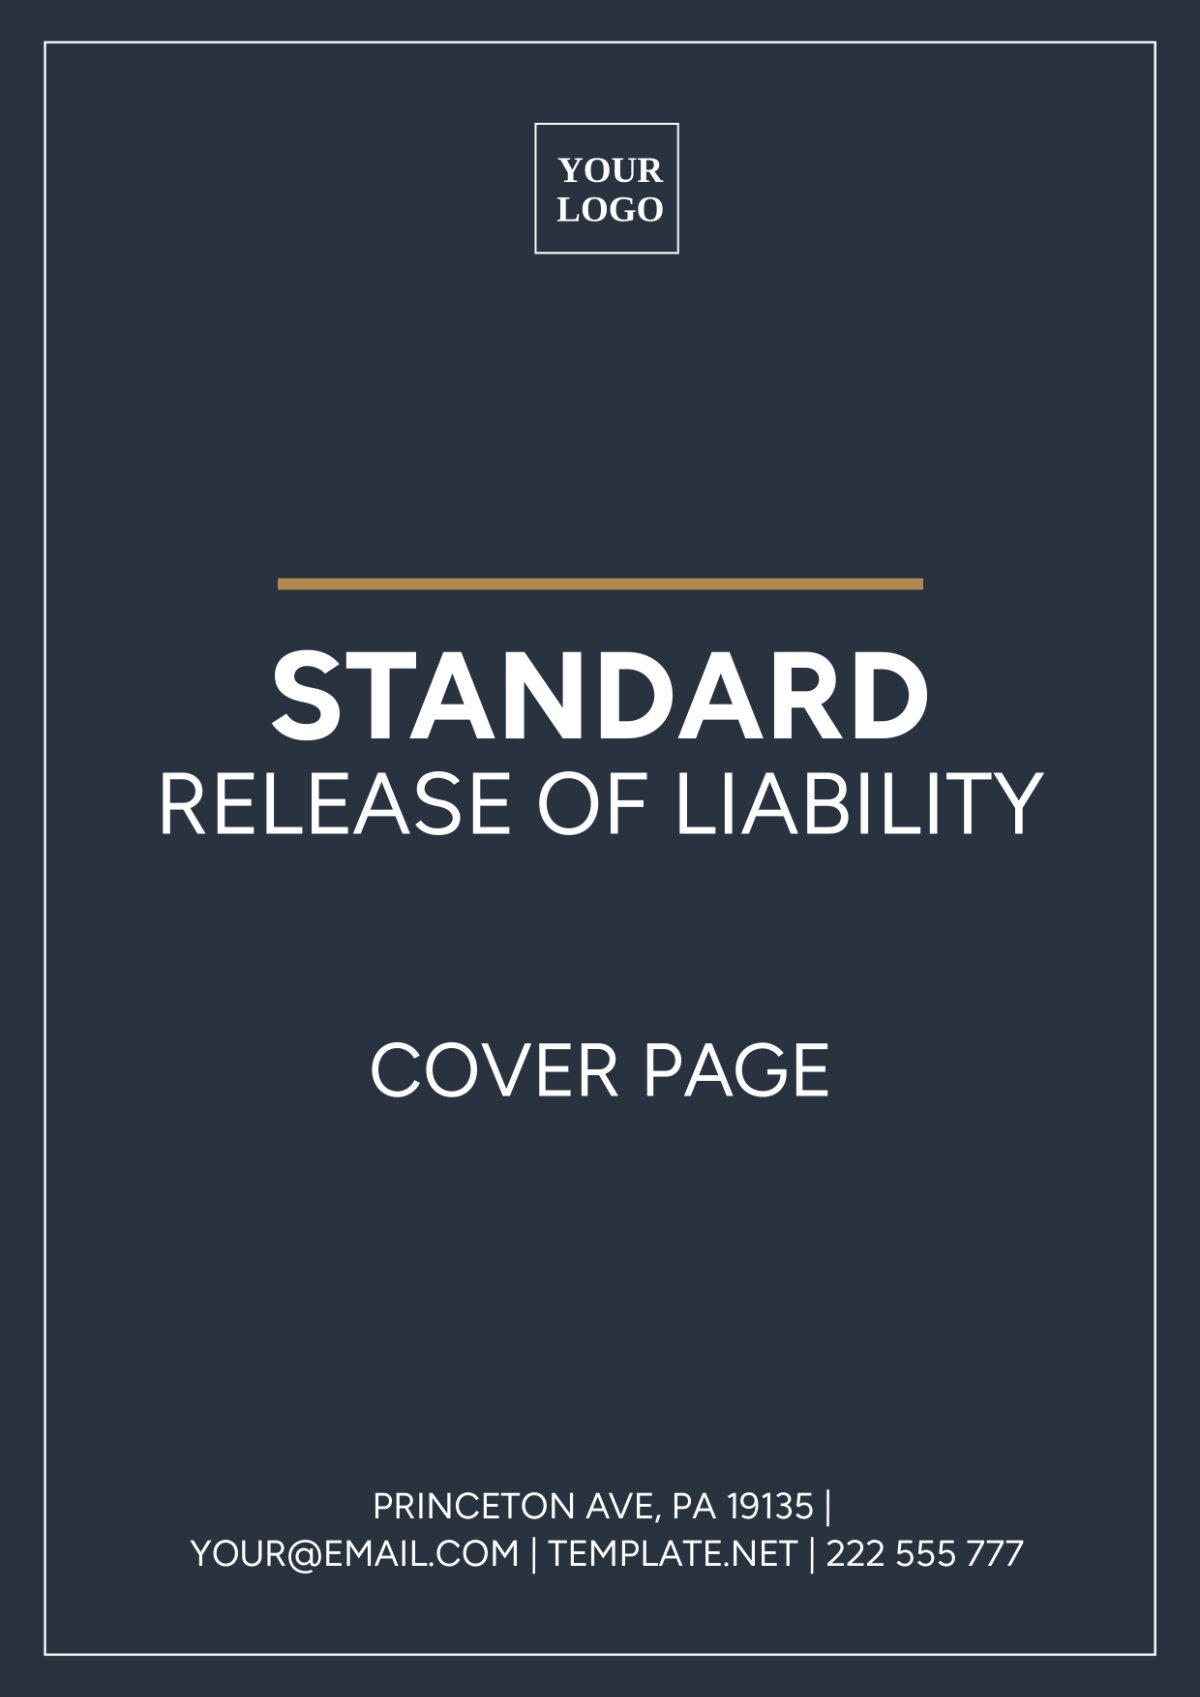 Standard Release of Liability Cover Page